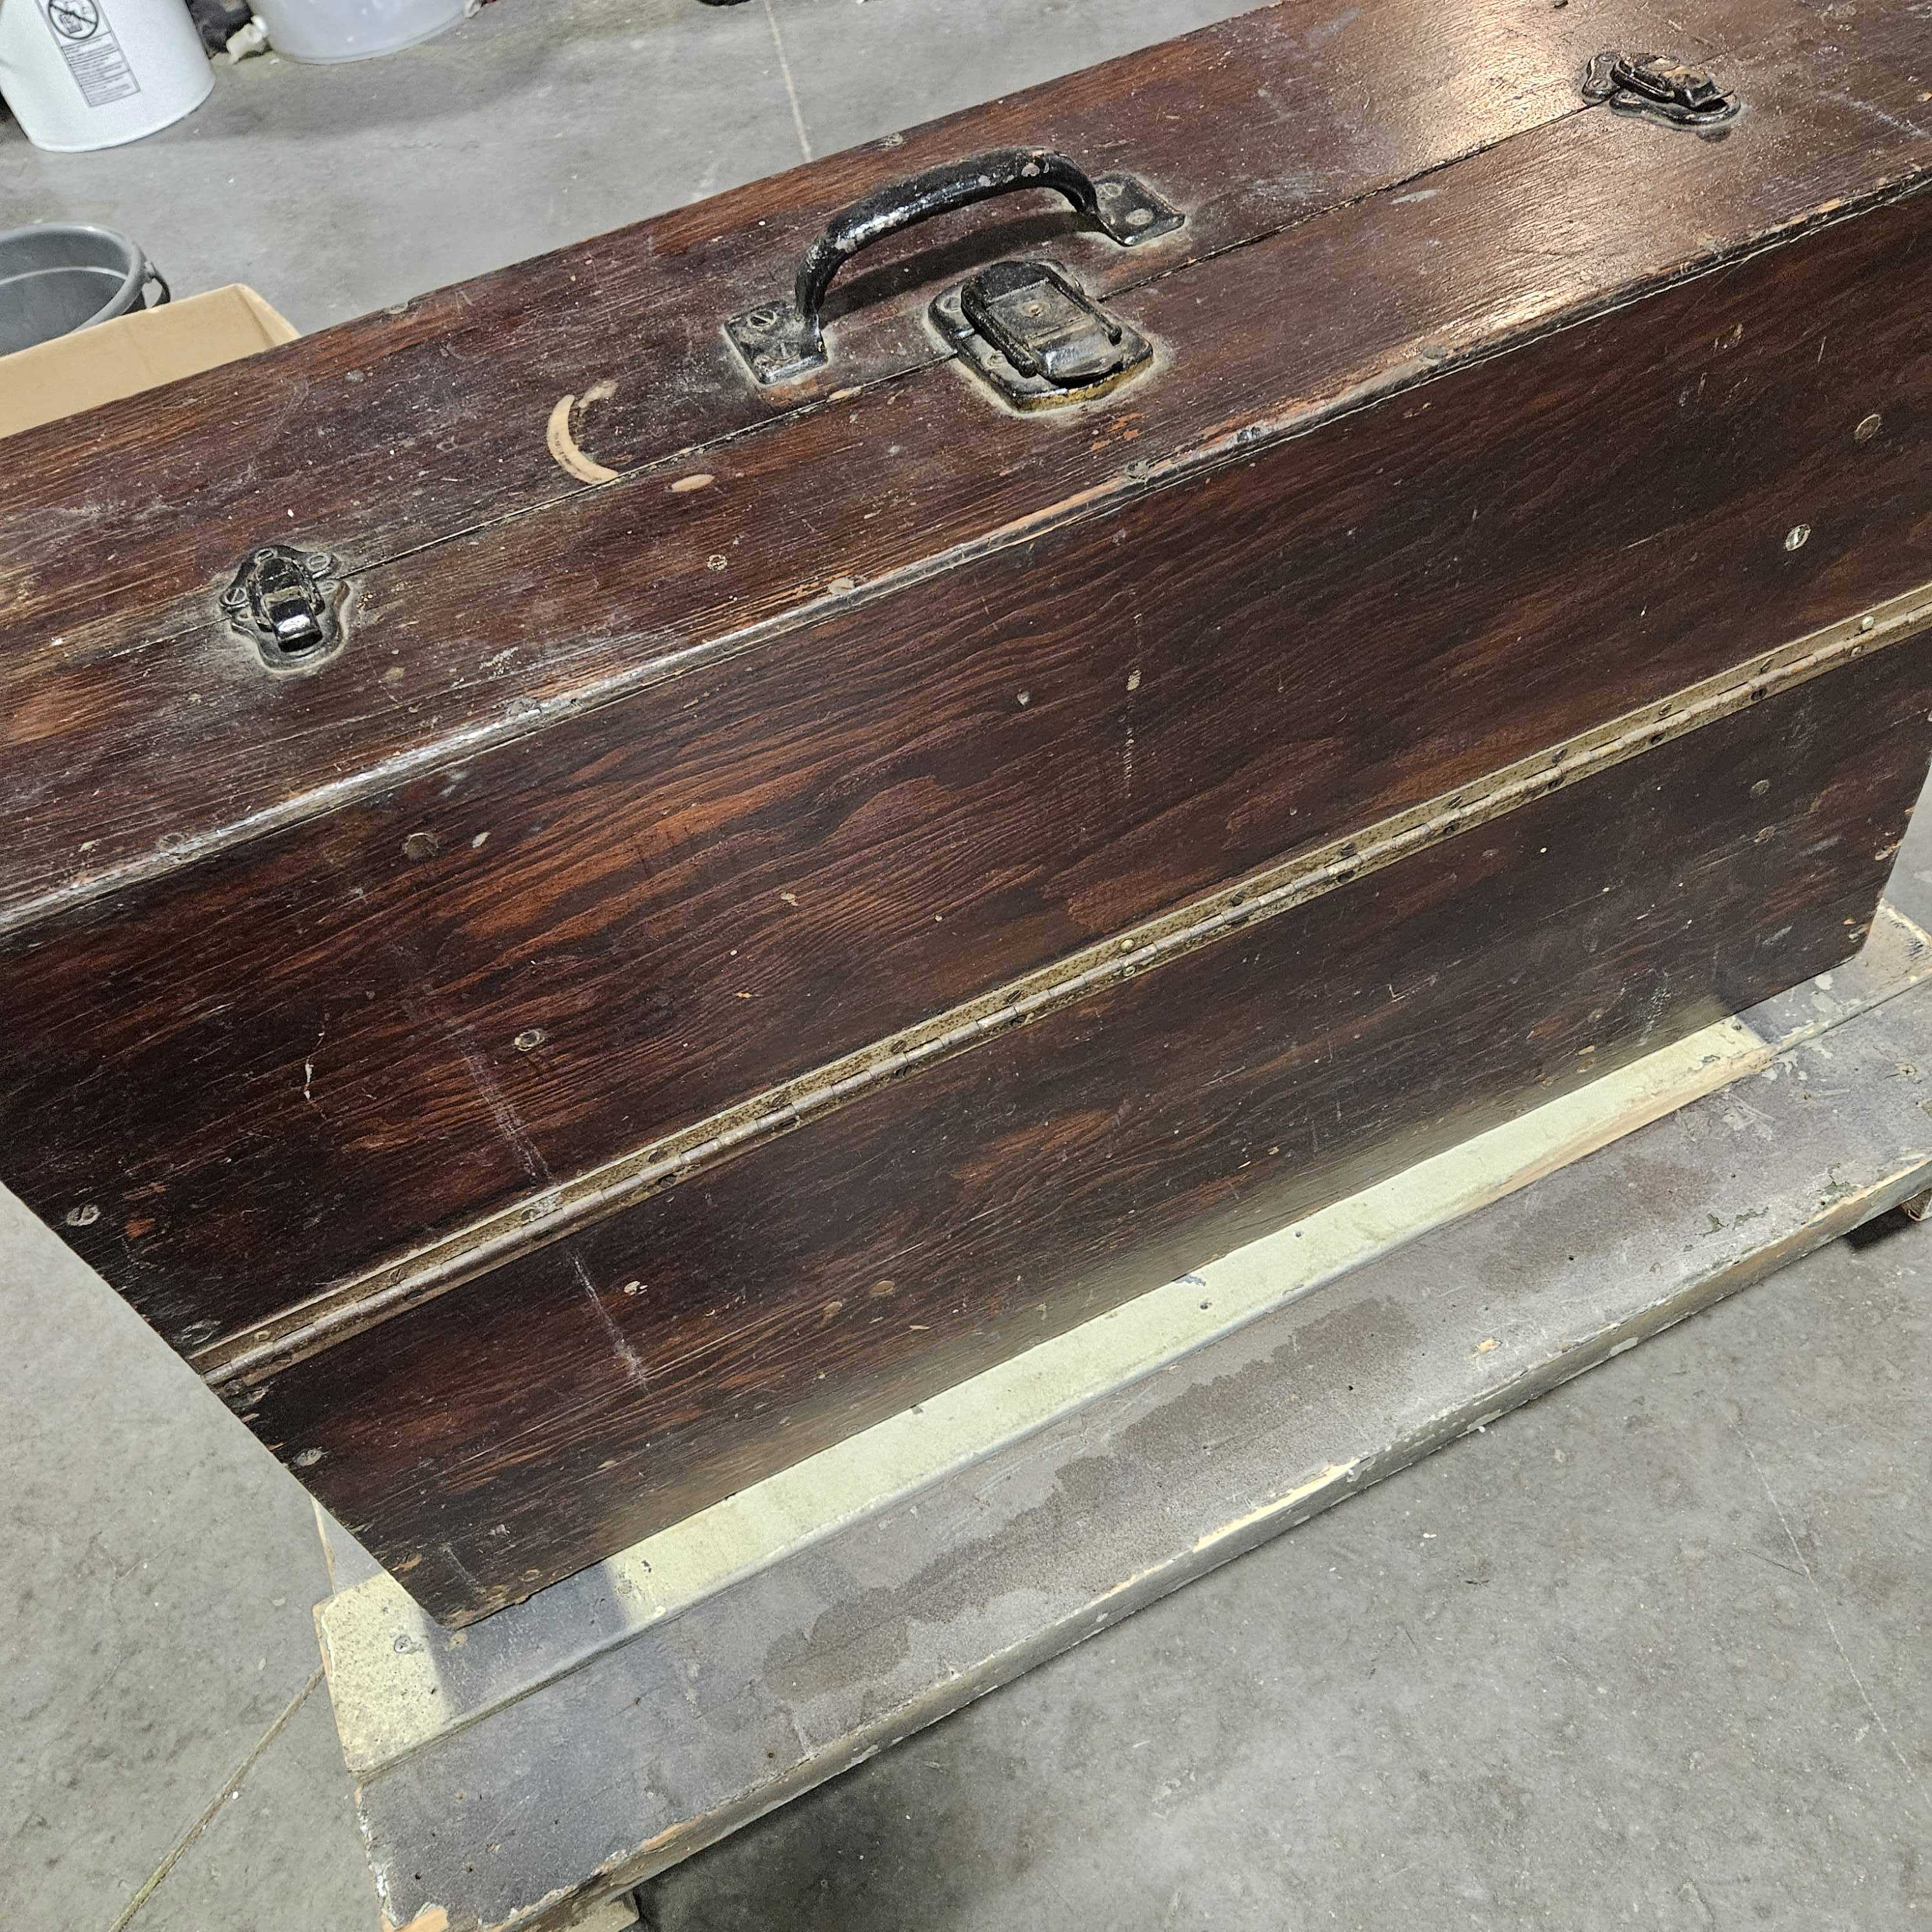 32"x 11"x 18.5" Vintage Hand Made Full of a Variety of Cool Vintage Tools Portable Tool Box